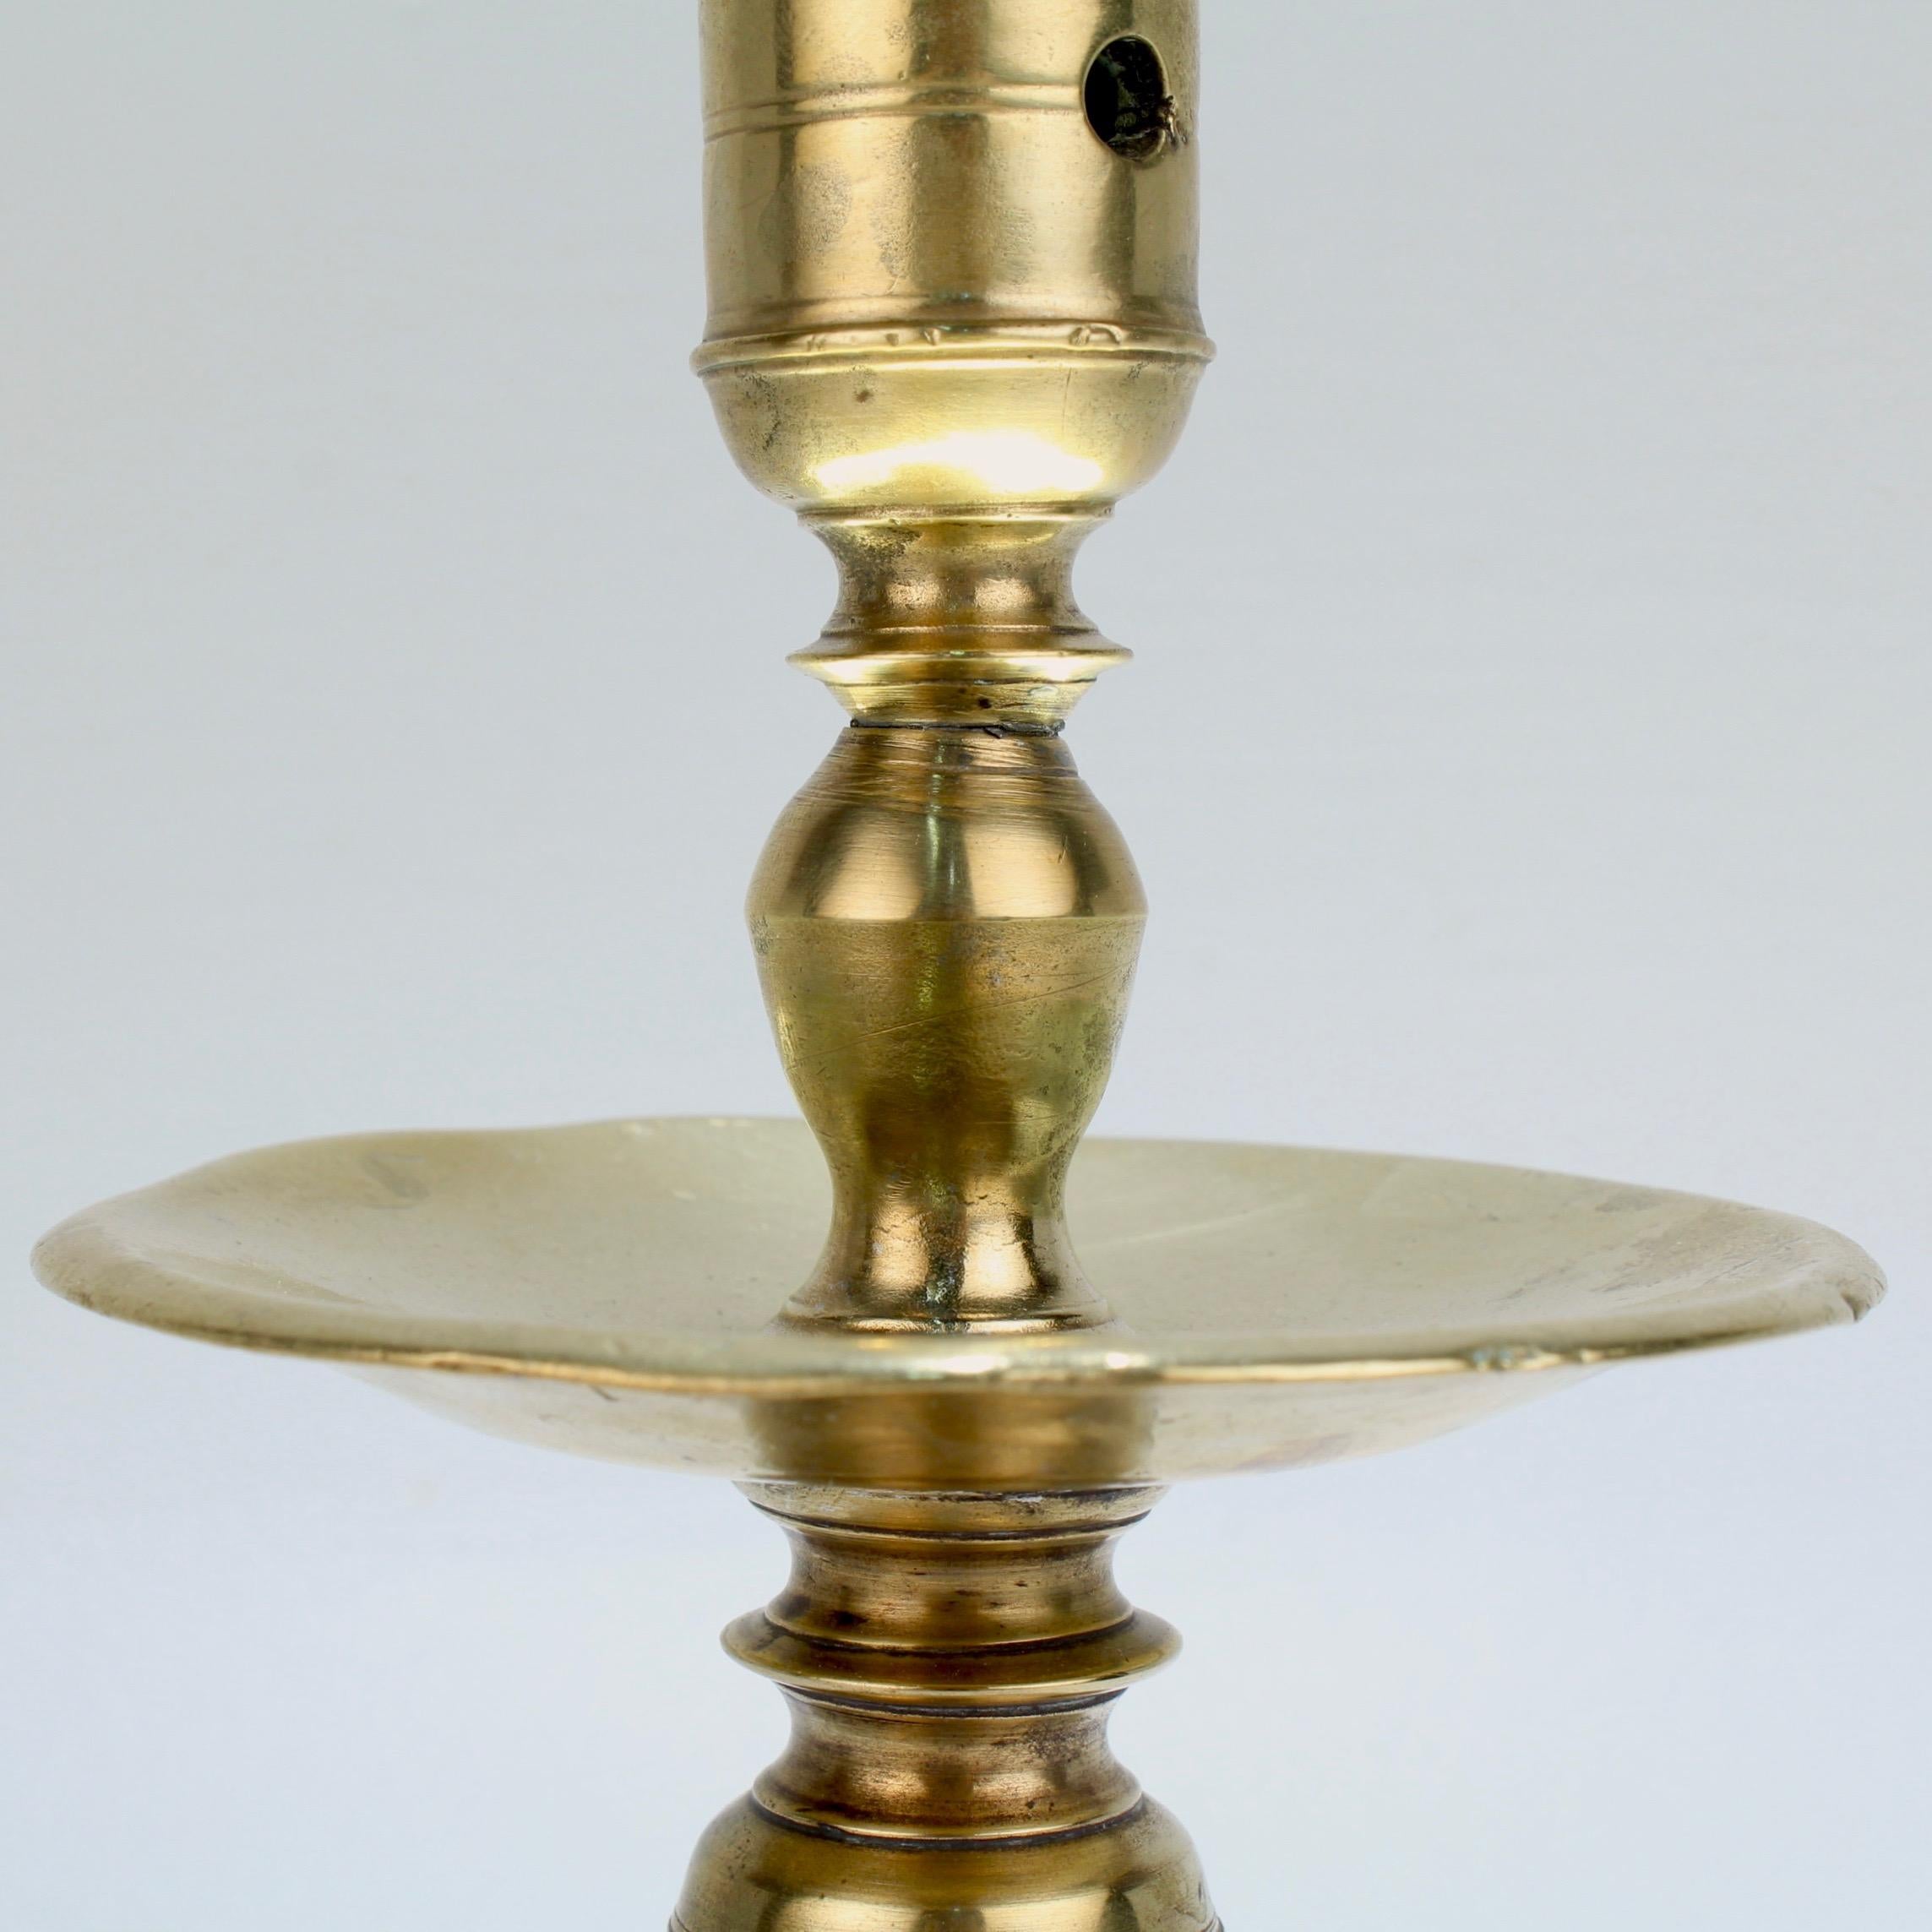 Antique 17th Century Dutch Brass Baluster Candlestick For Sale 3